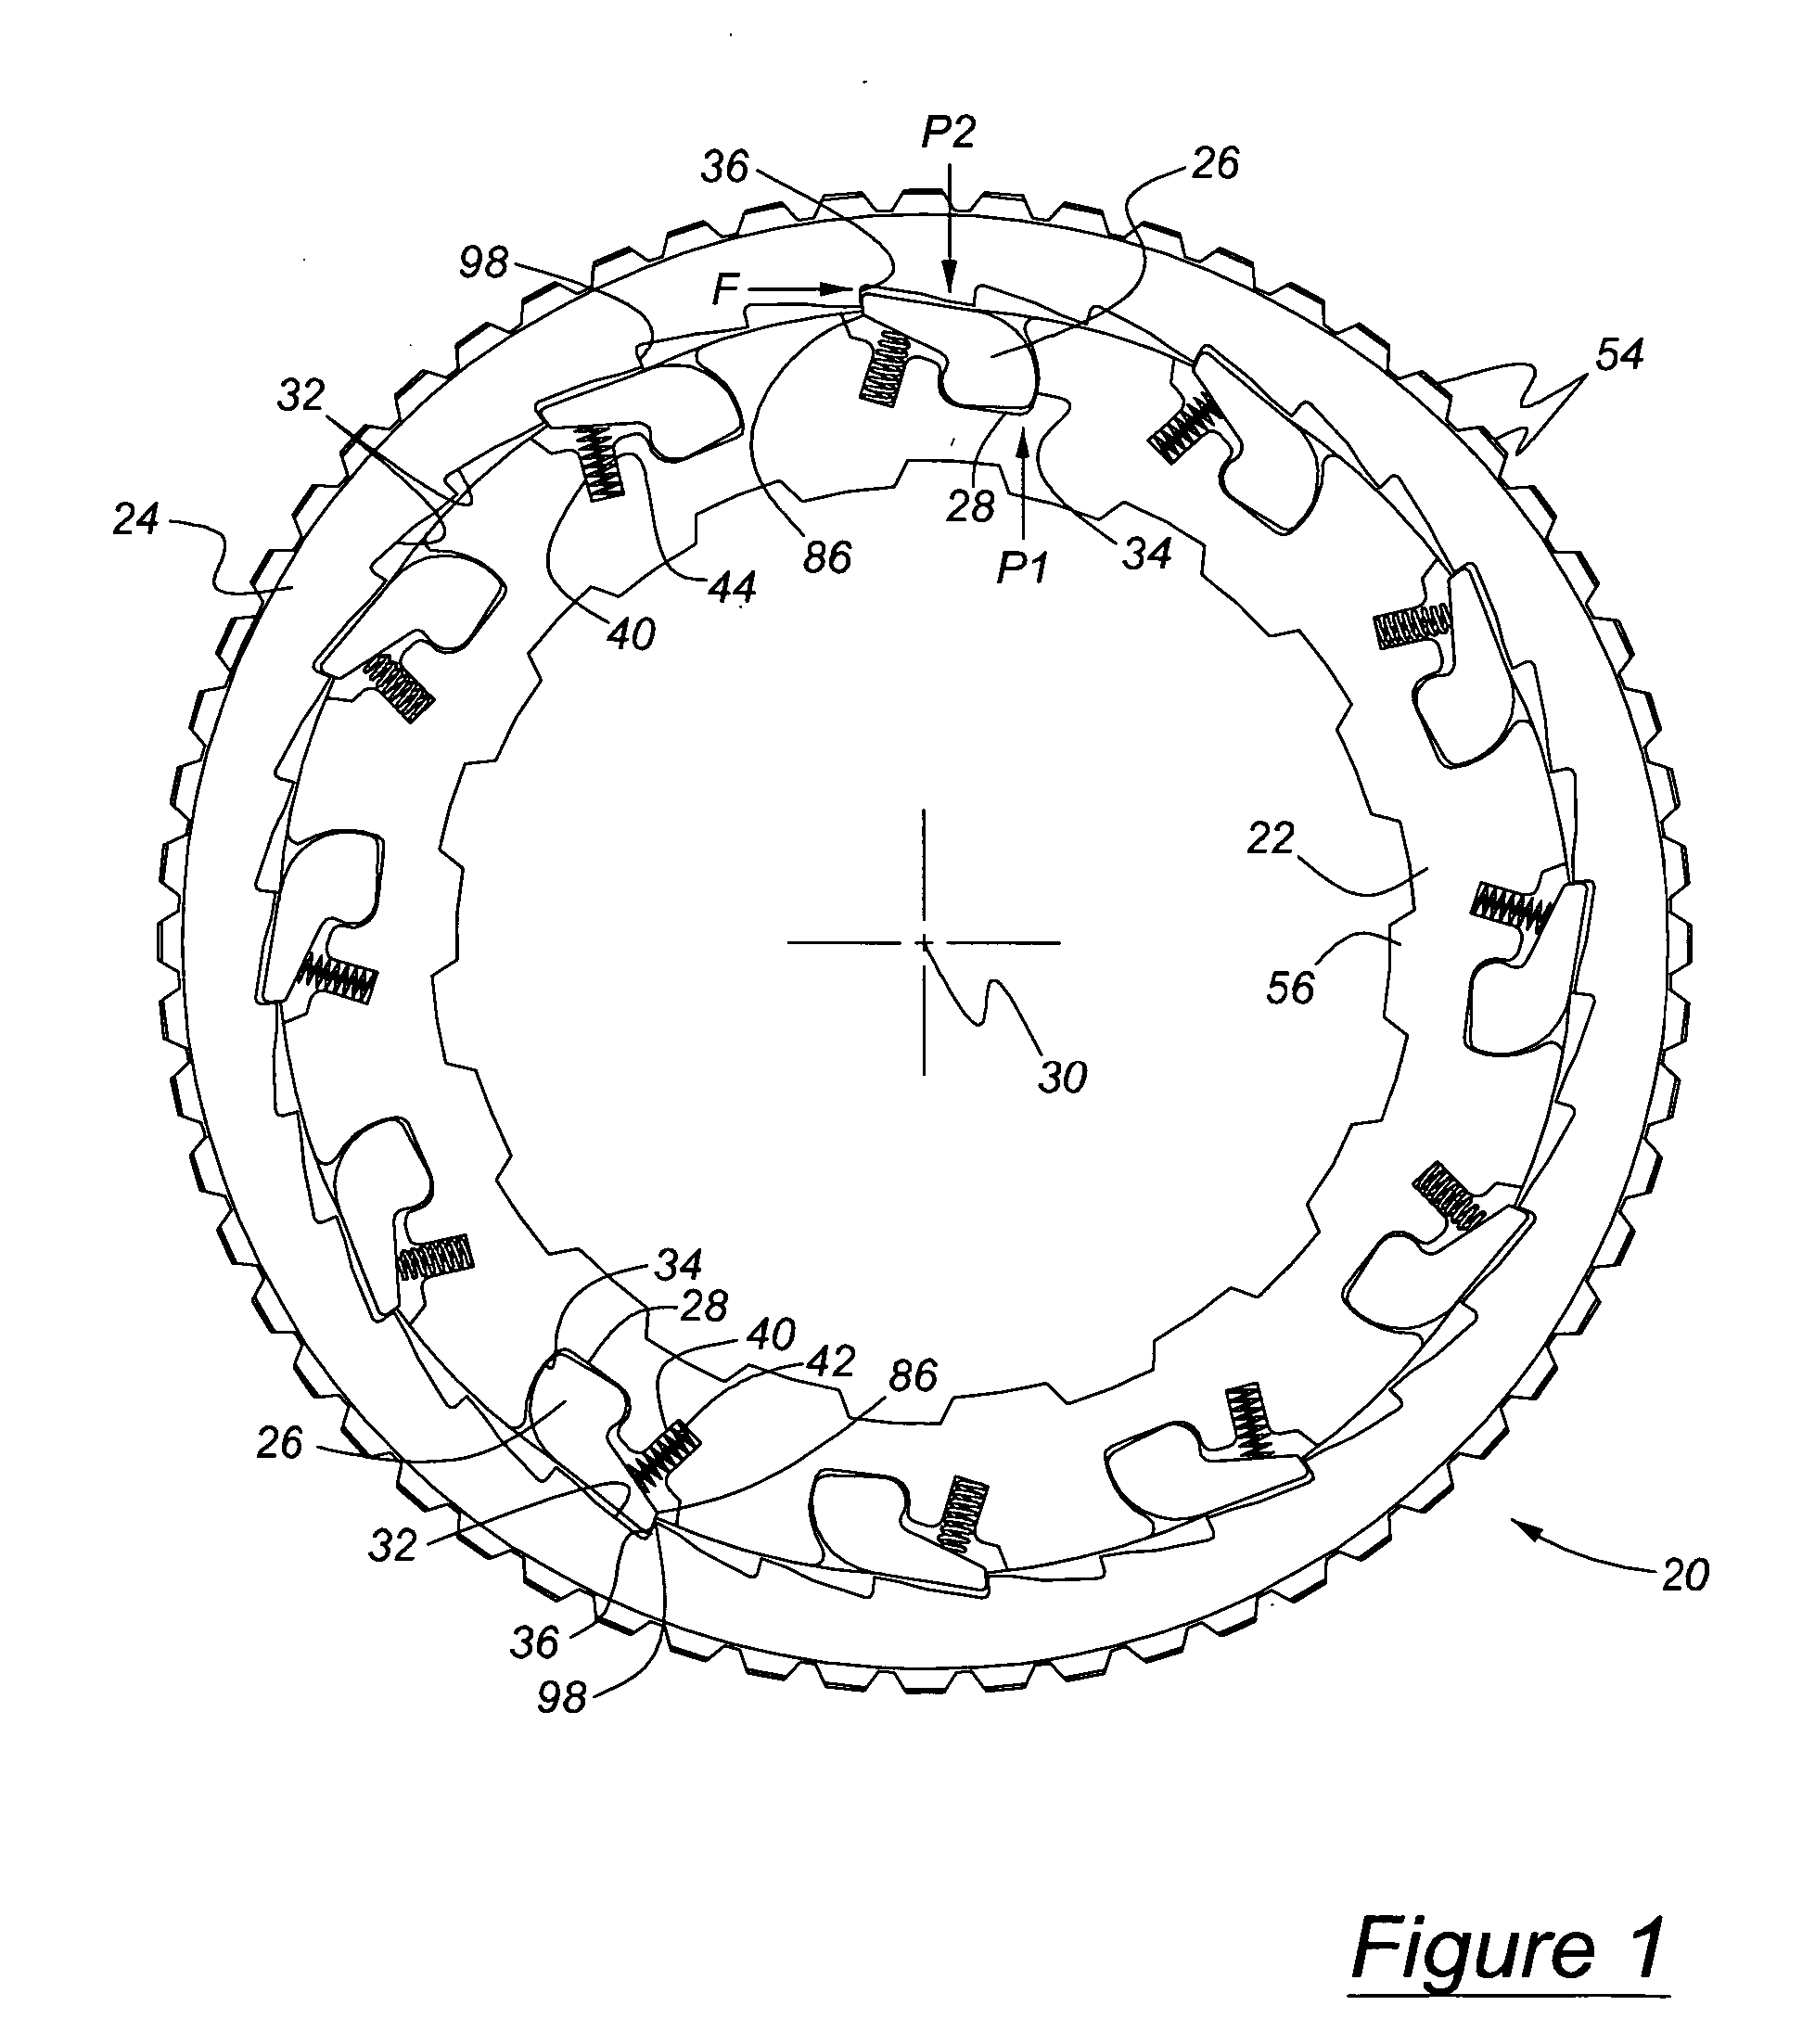 Ratcheting one-way clutch having piloted surfaces